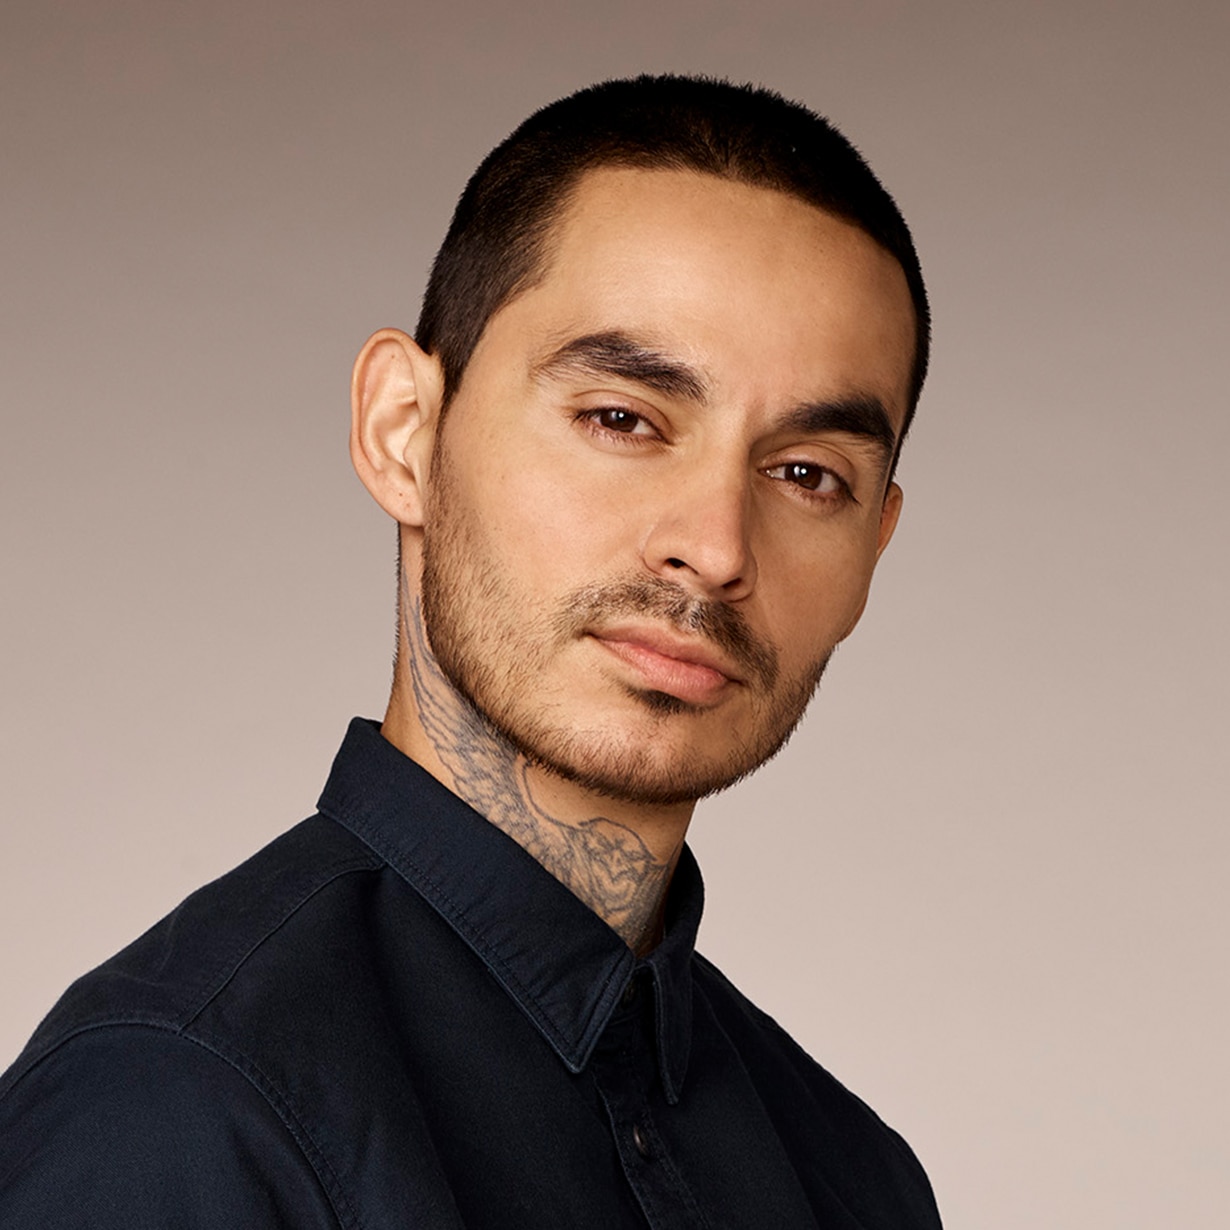 Played by Manny Montana.